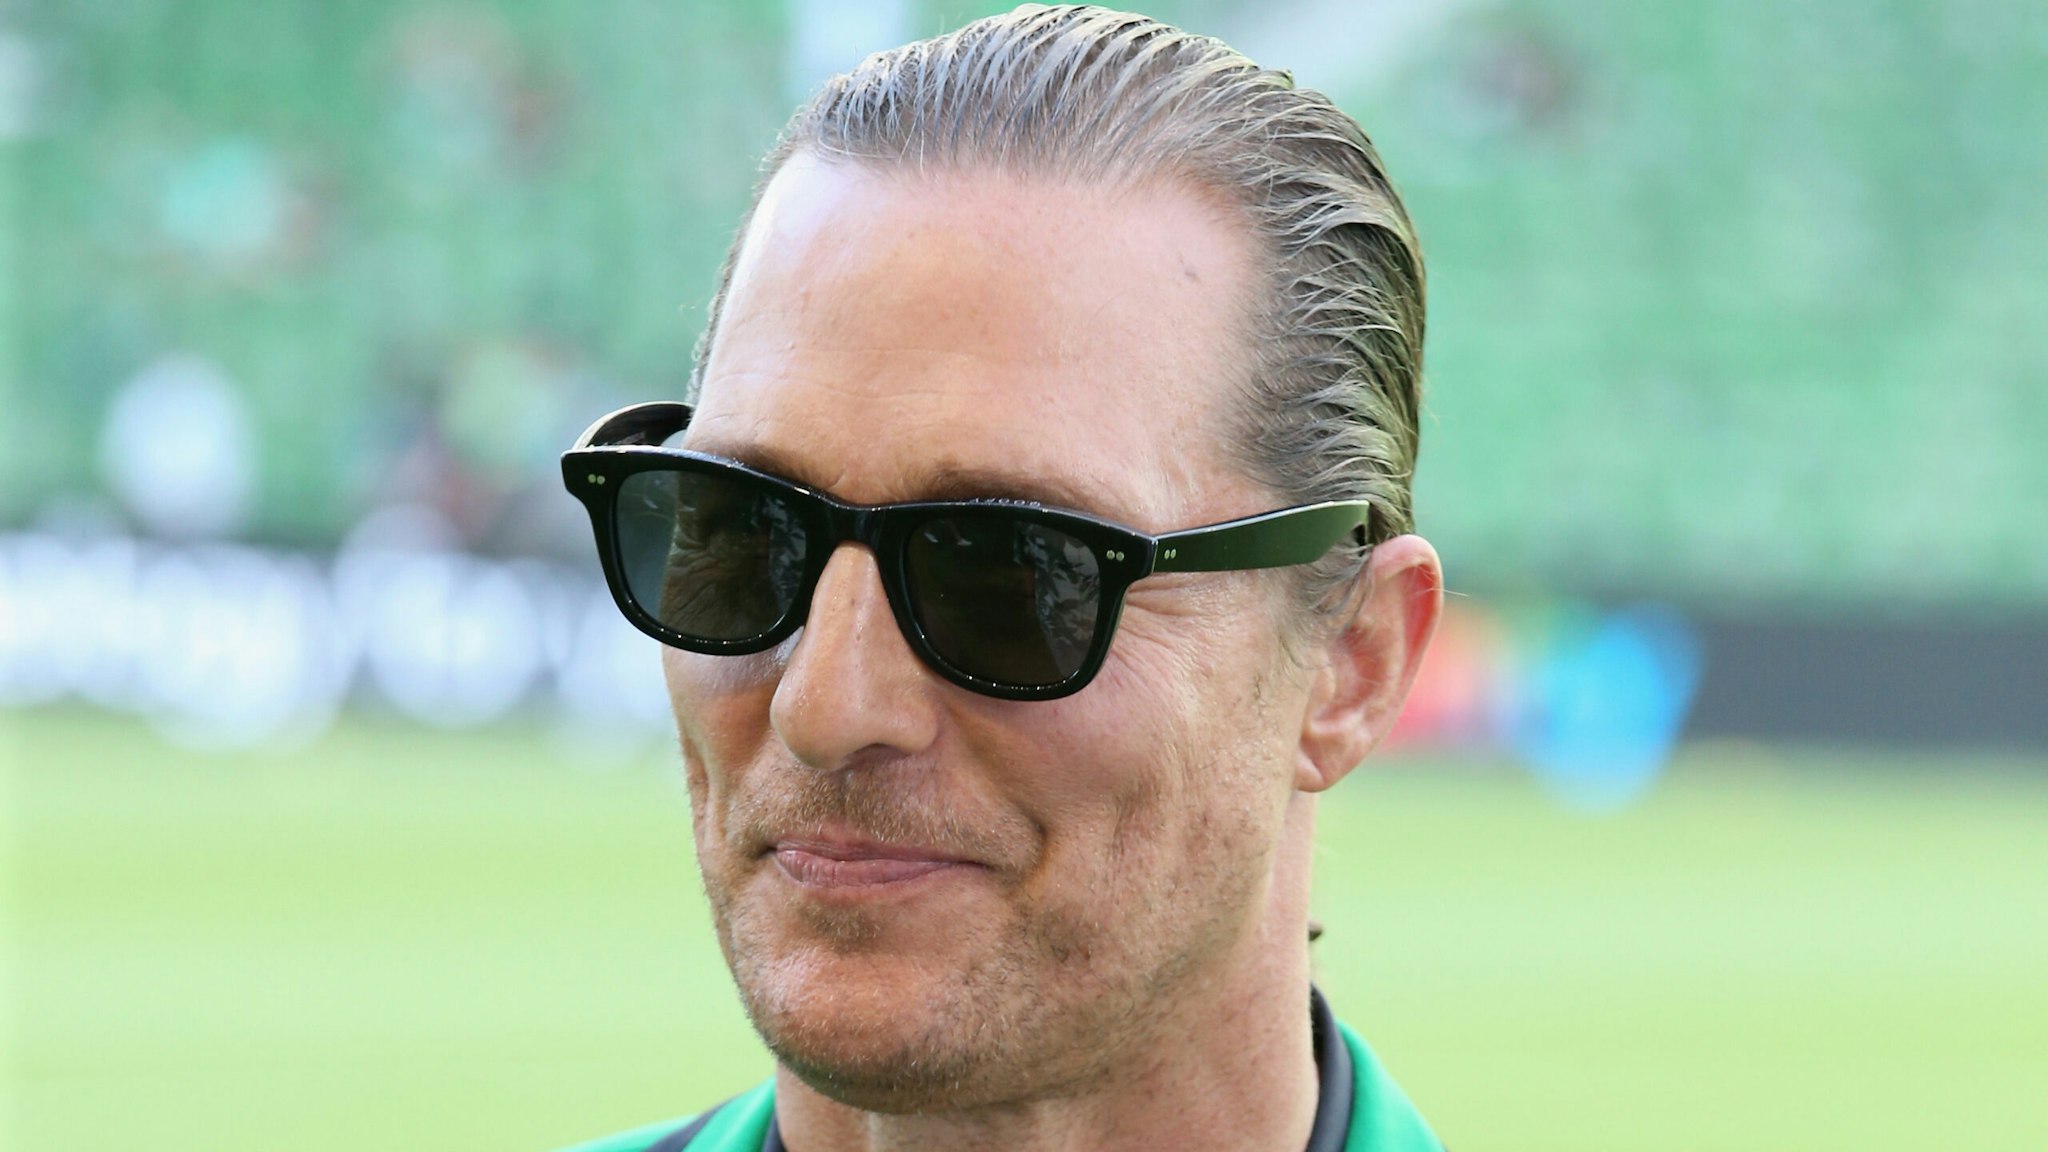 AUSTIN, TX - JUNE 19: Matthew McConaughey attends the inaugural home game between the San Jose Earthquakes and Austin FC at Q2 Stadium on June 19, 2021 in Austin, Texas.